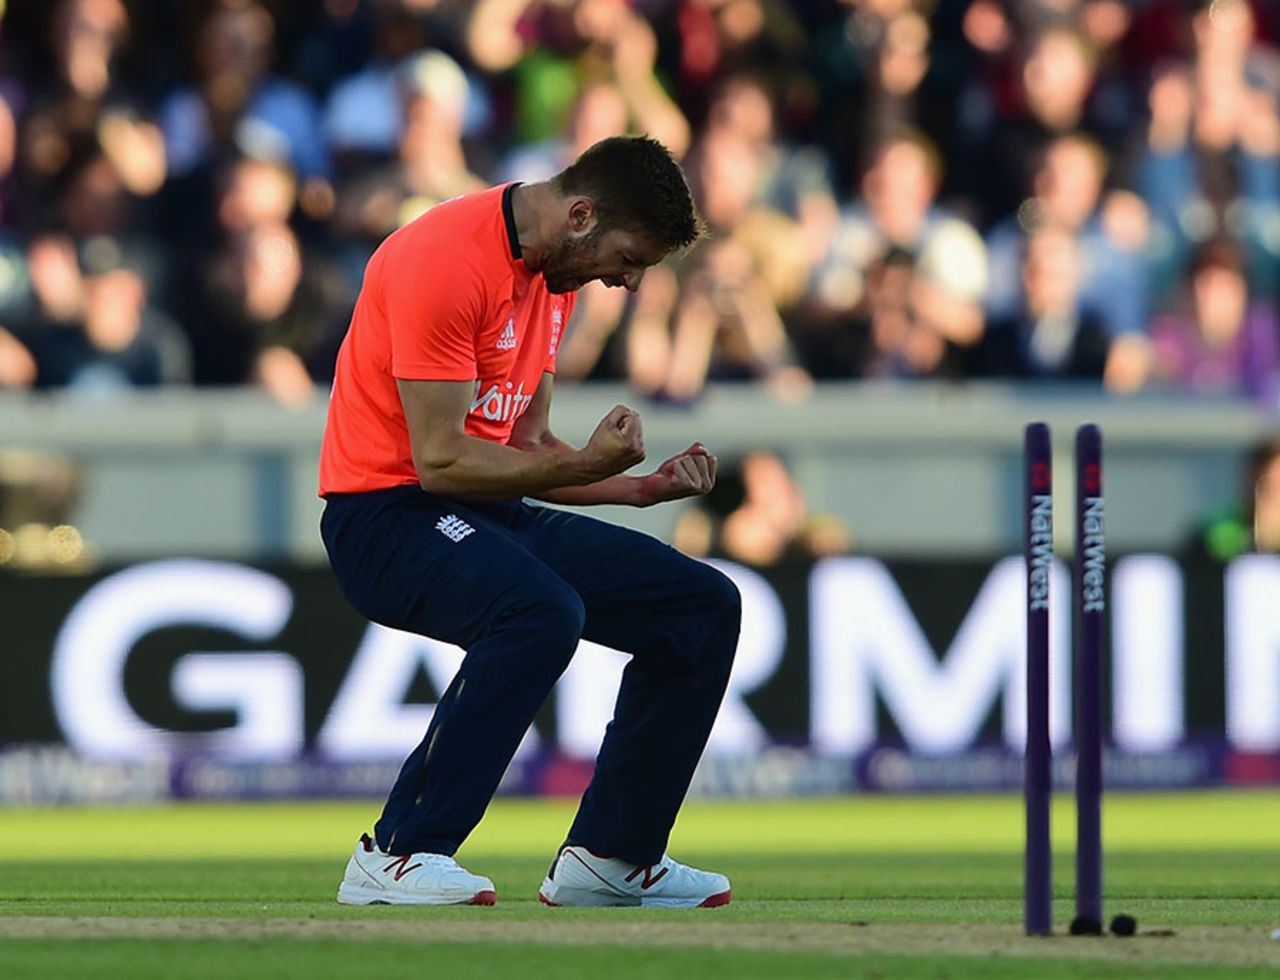 Mark Wood bowled Brendon McCullum, England v New Zealand, only T20, Old Trafford, June 23, 2015